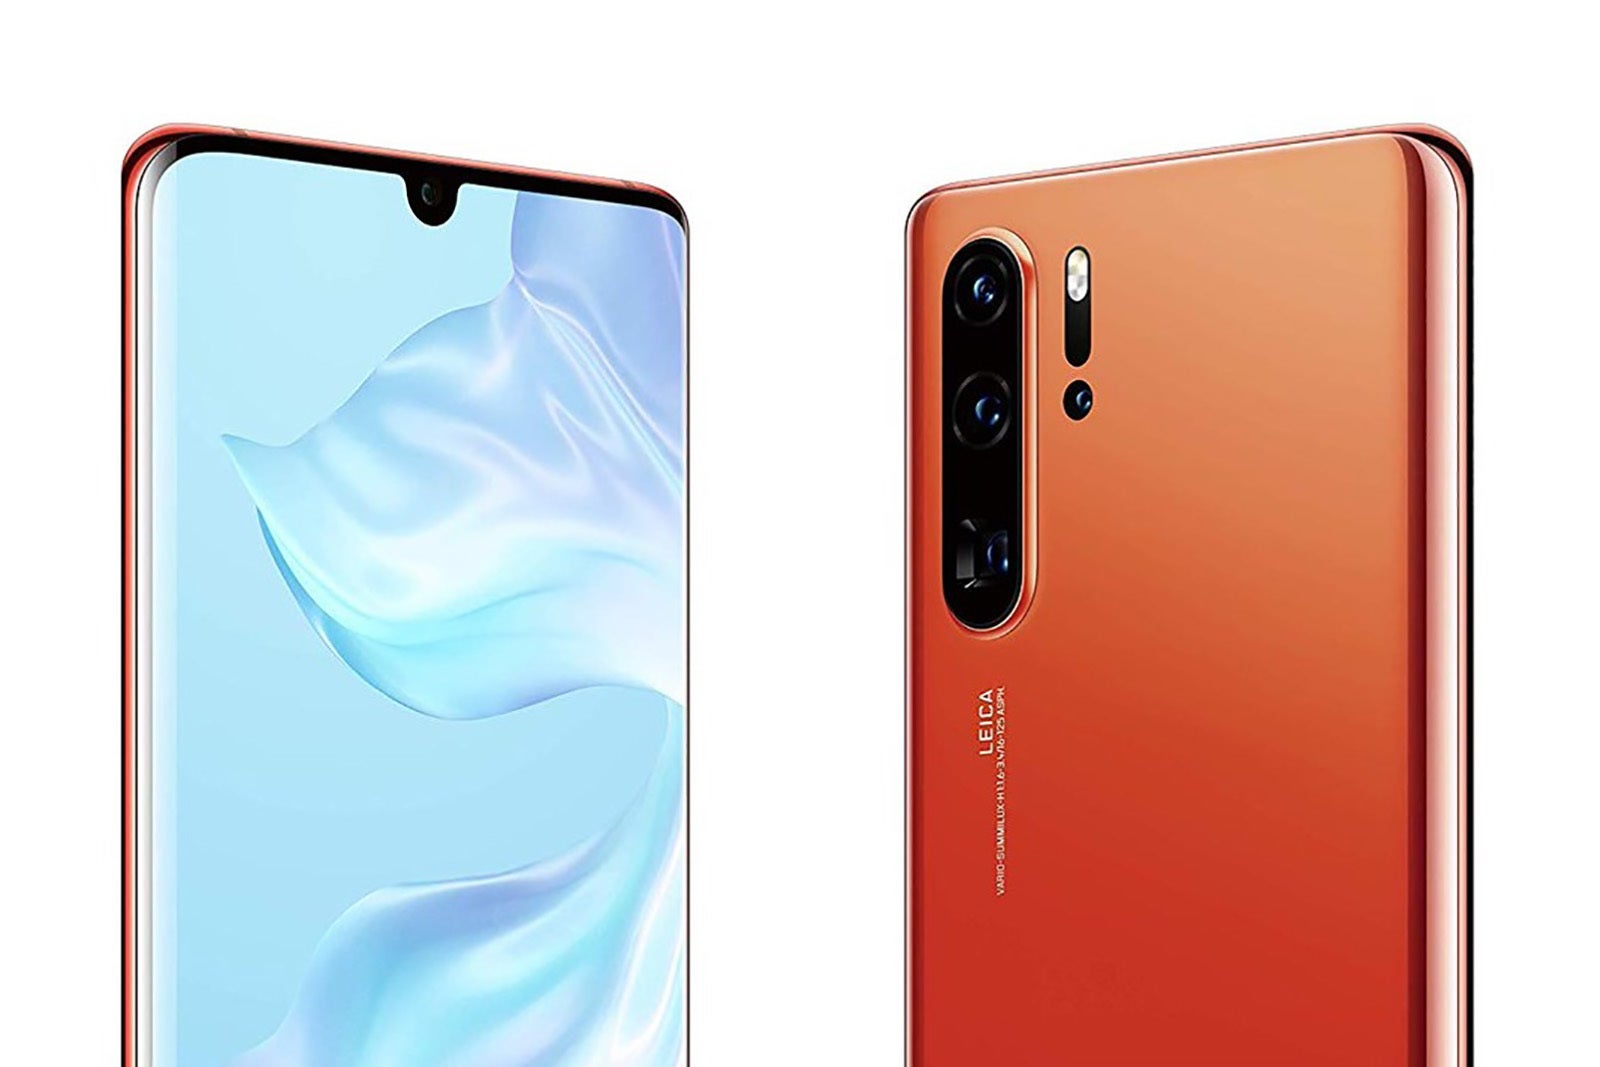 Huawei P30 Pro photo, leaked on Amazon Spain - Is this the first film shot on the Huawei P30 Pro?